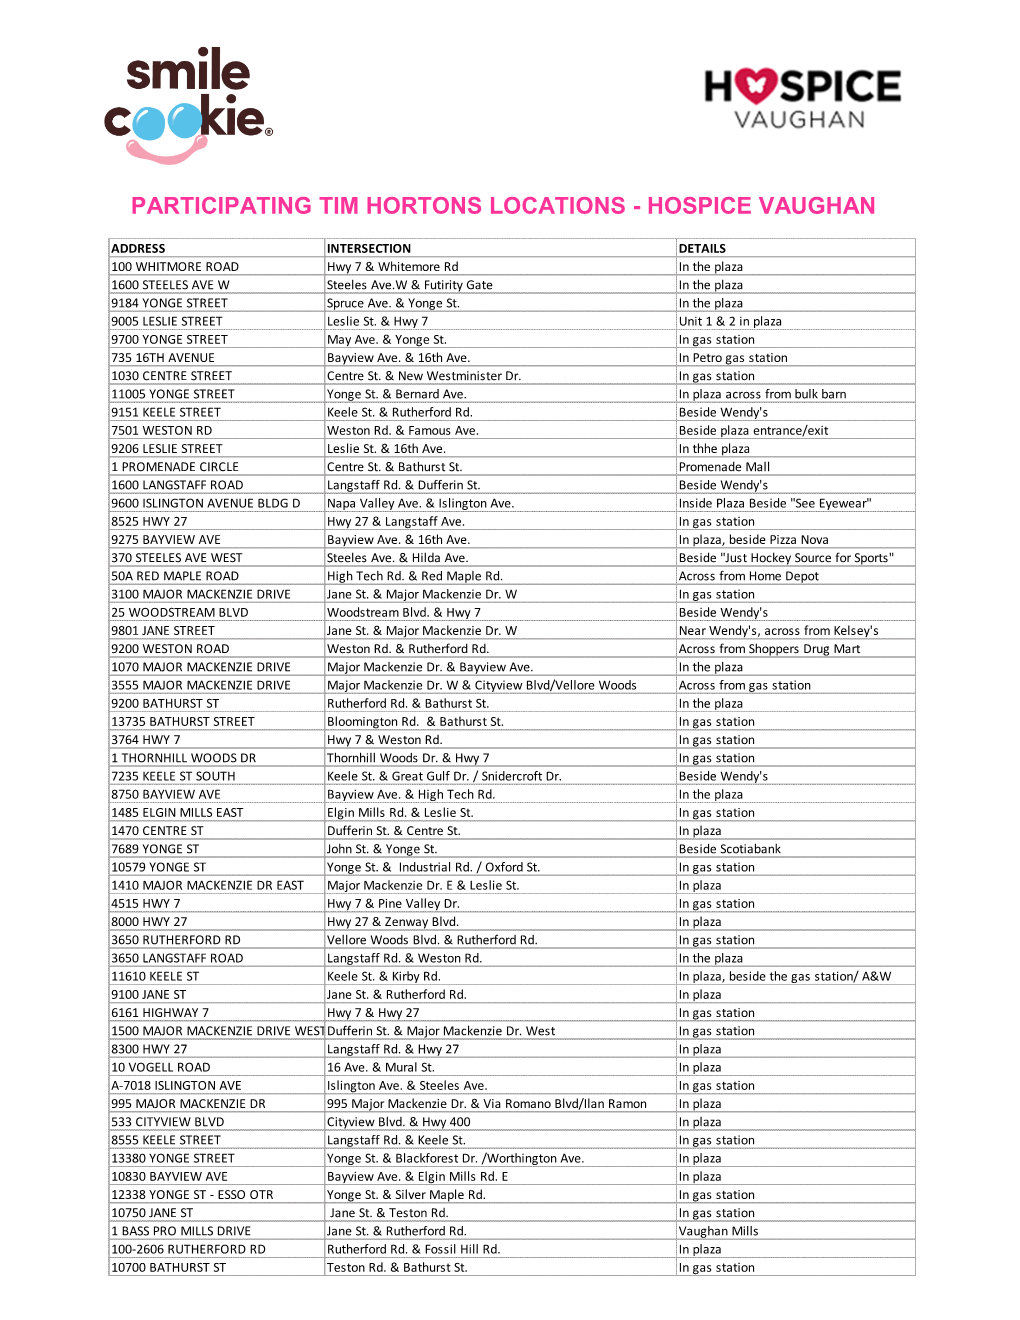 Participating Tim Hortons Locations - Hospice Vaughan